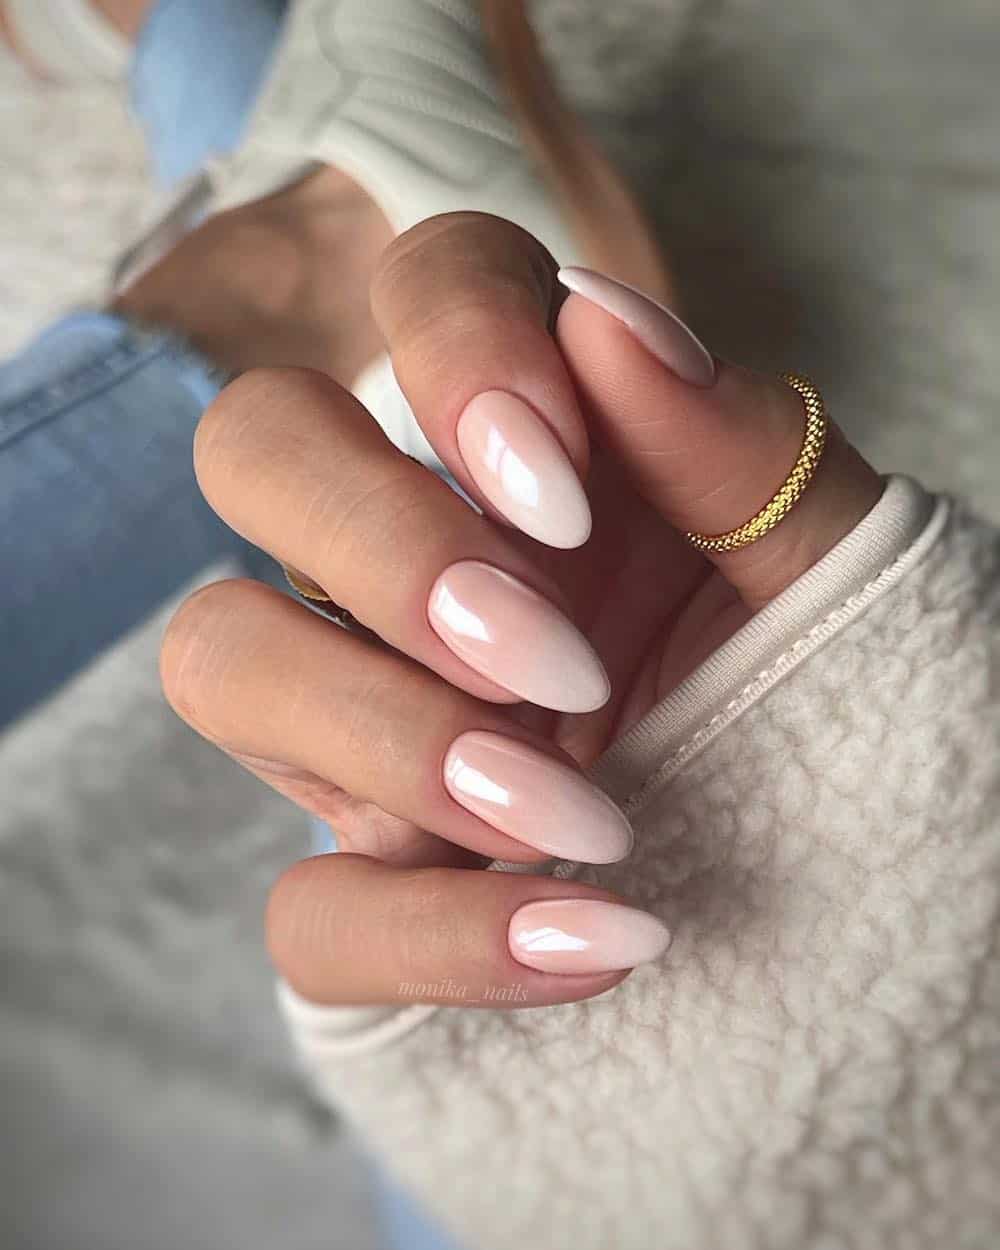 A hand with long almond nails painted a nude pink to cream ombre with a metallic finish